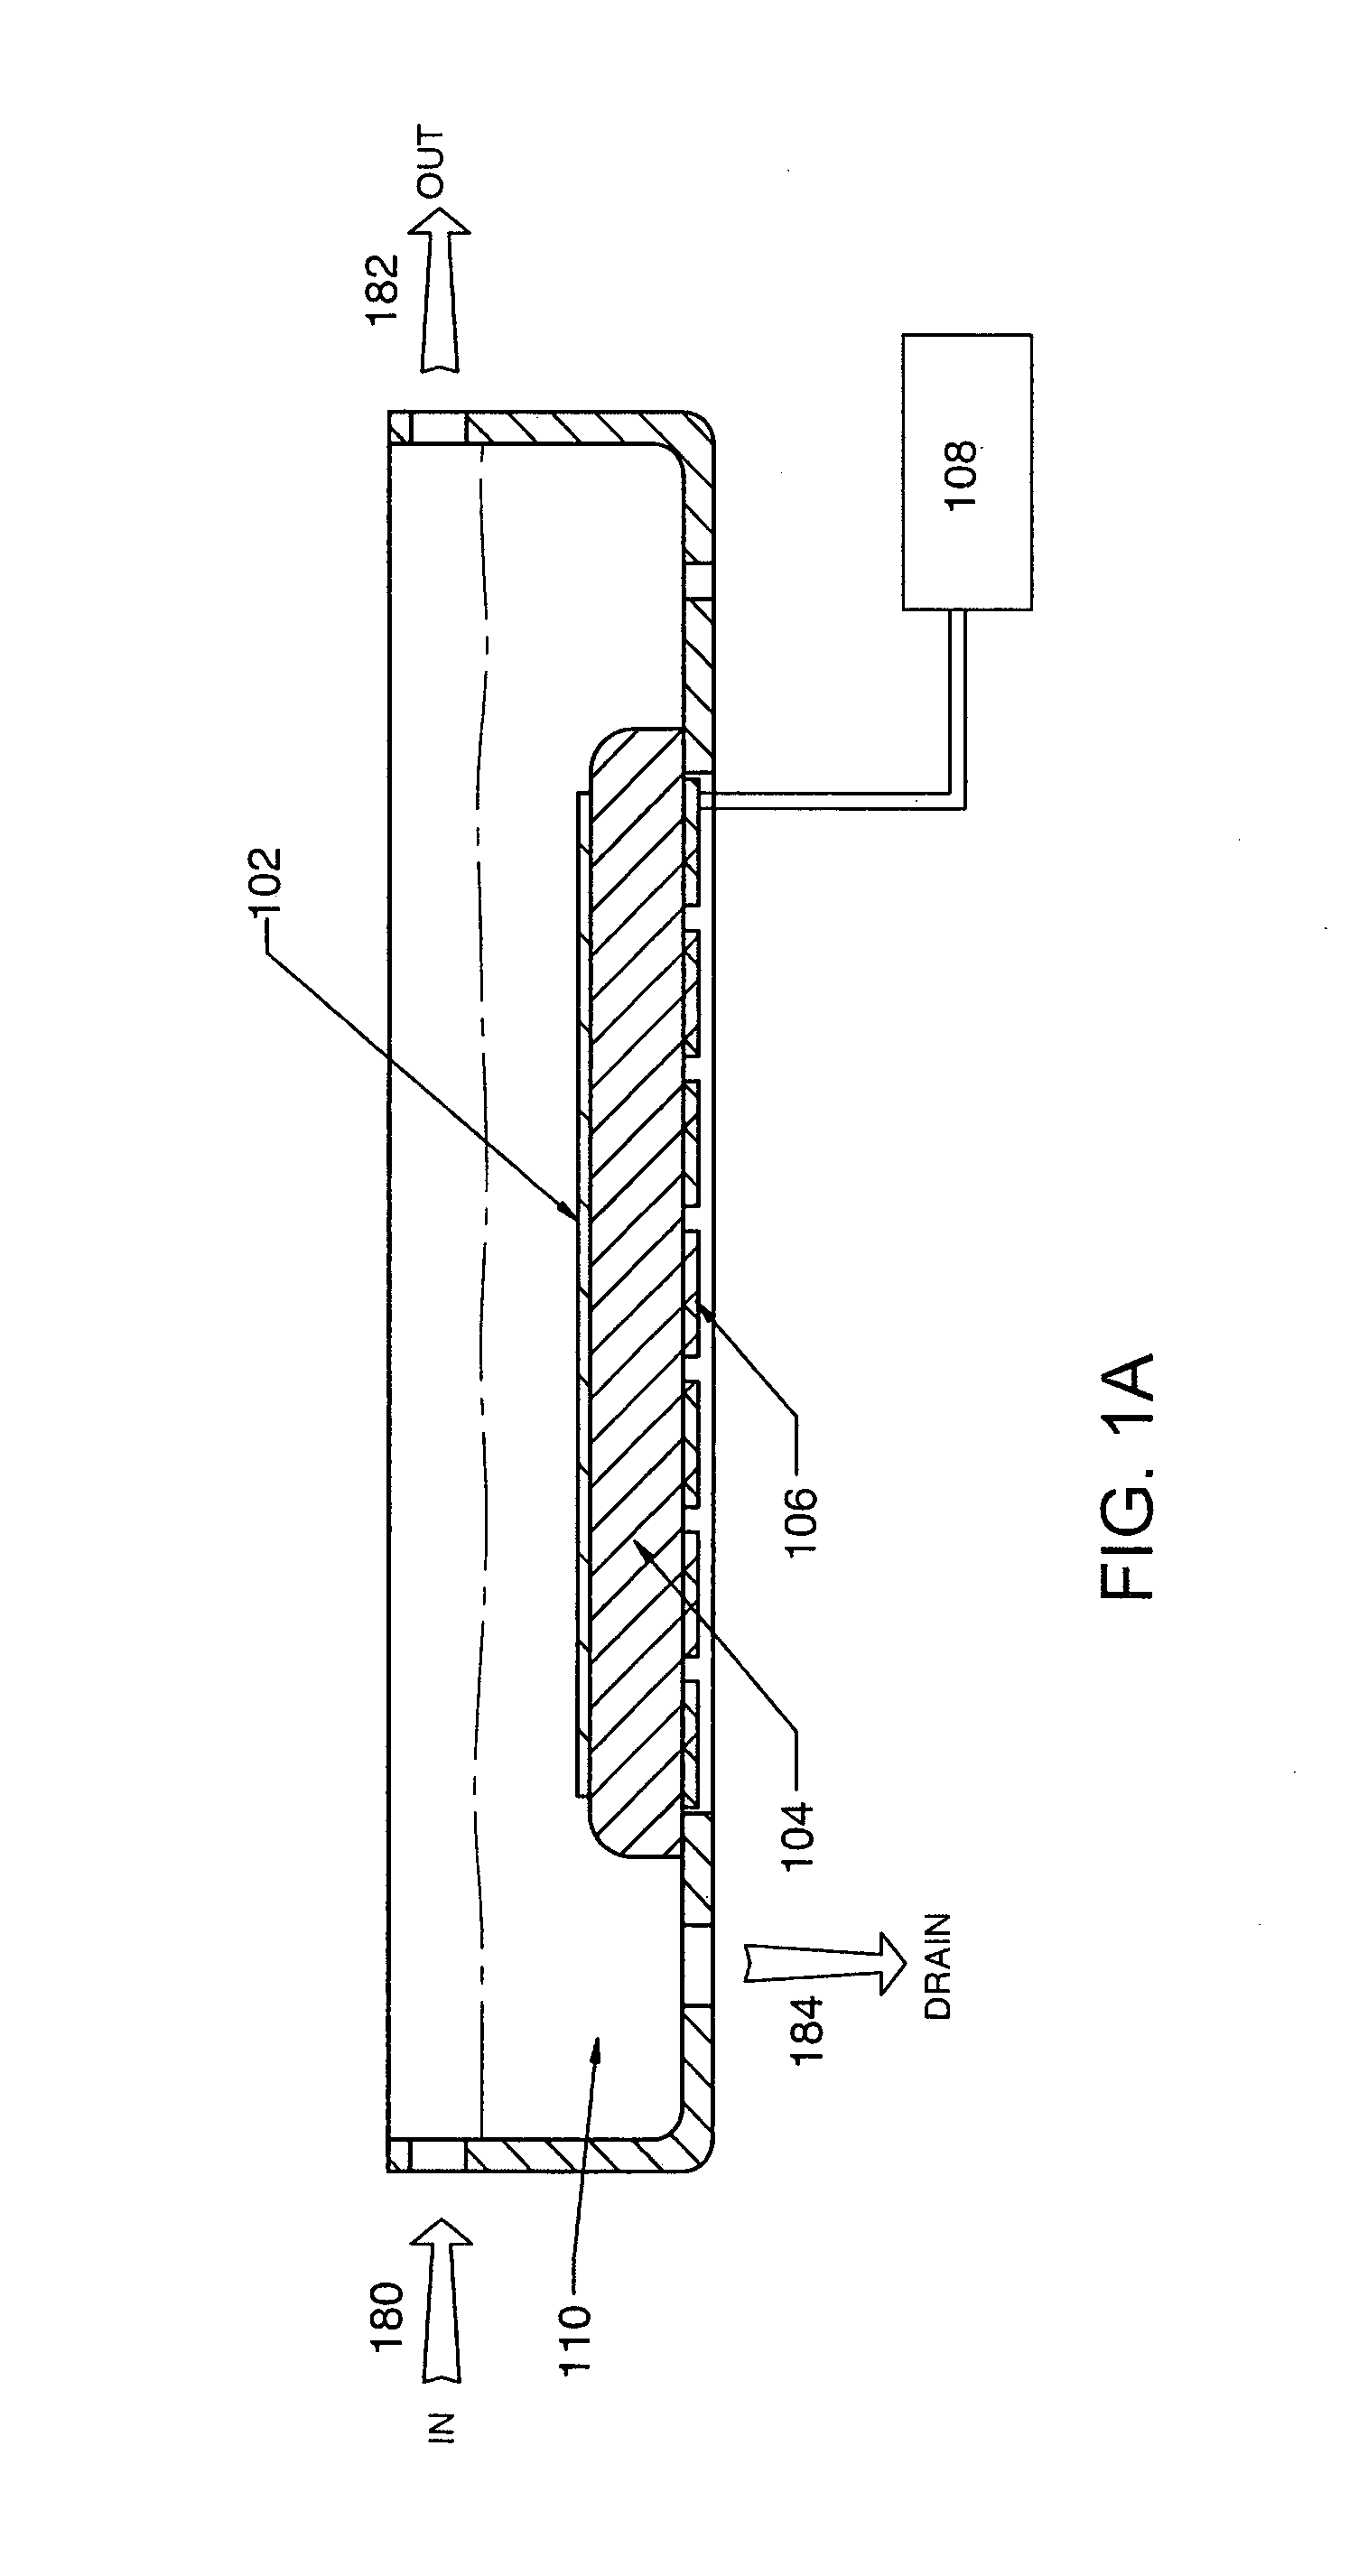 Method and apparatus to process substrates with megasonic energy